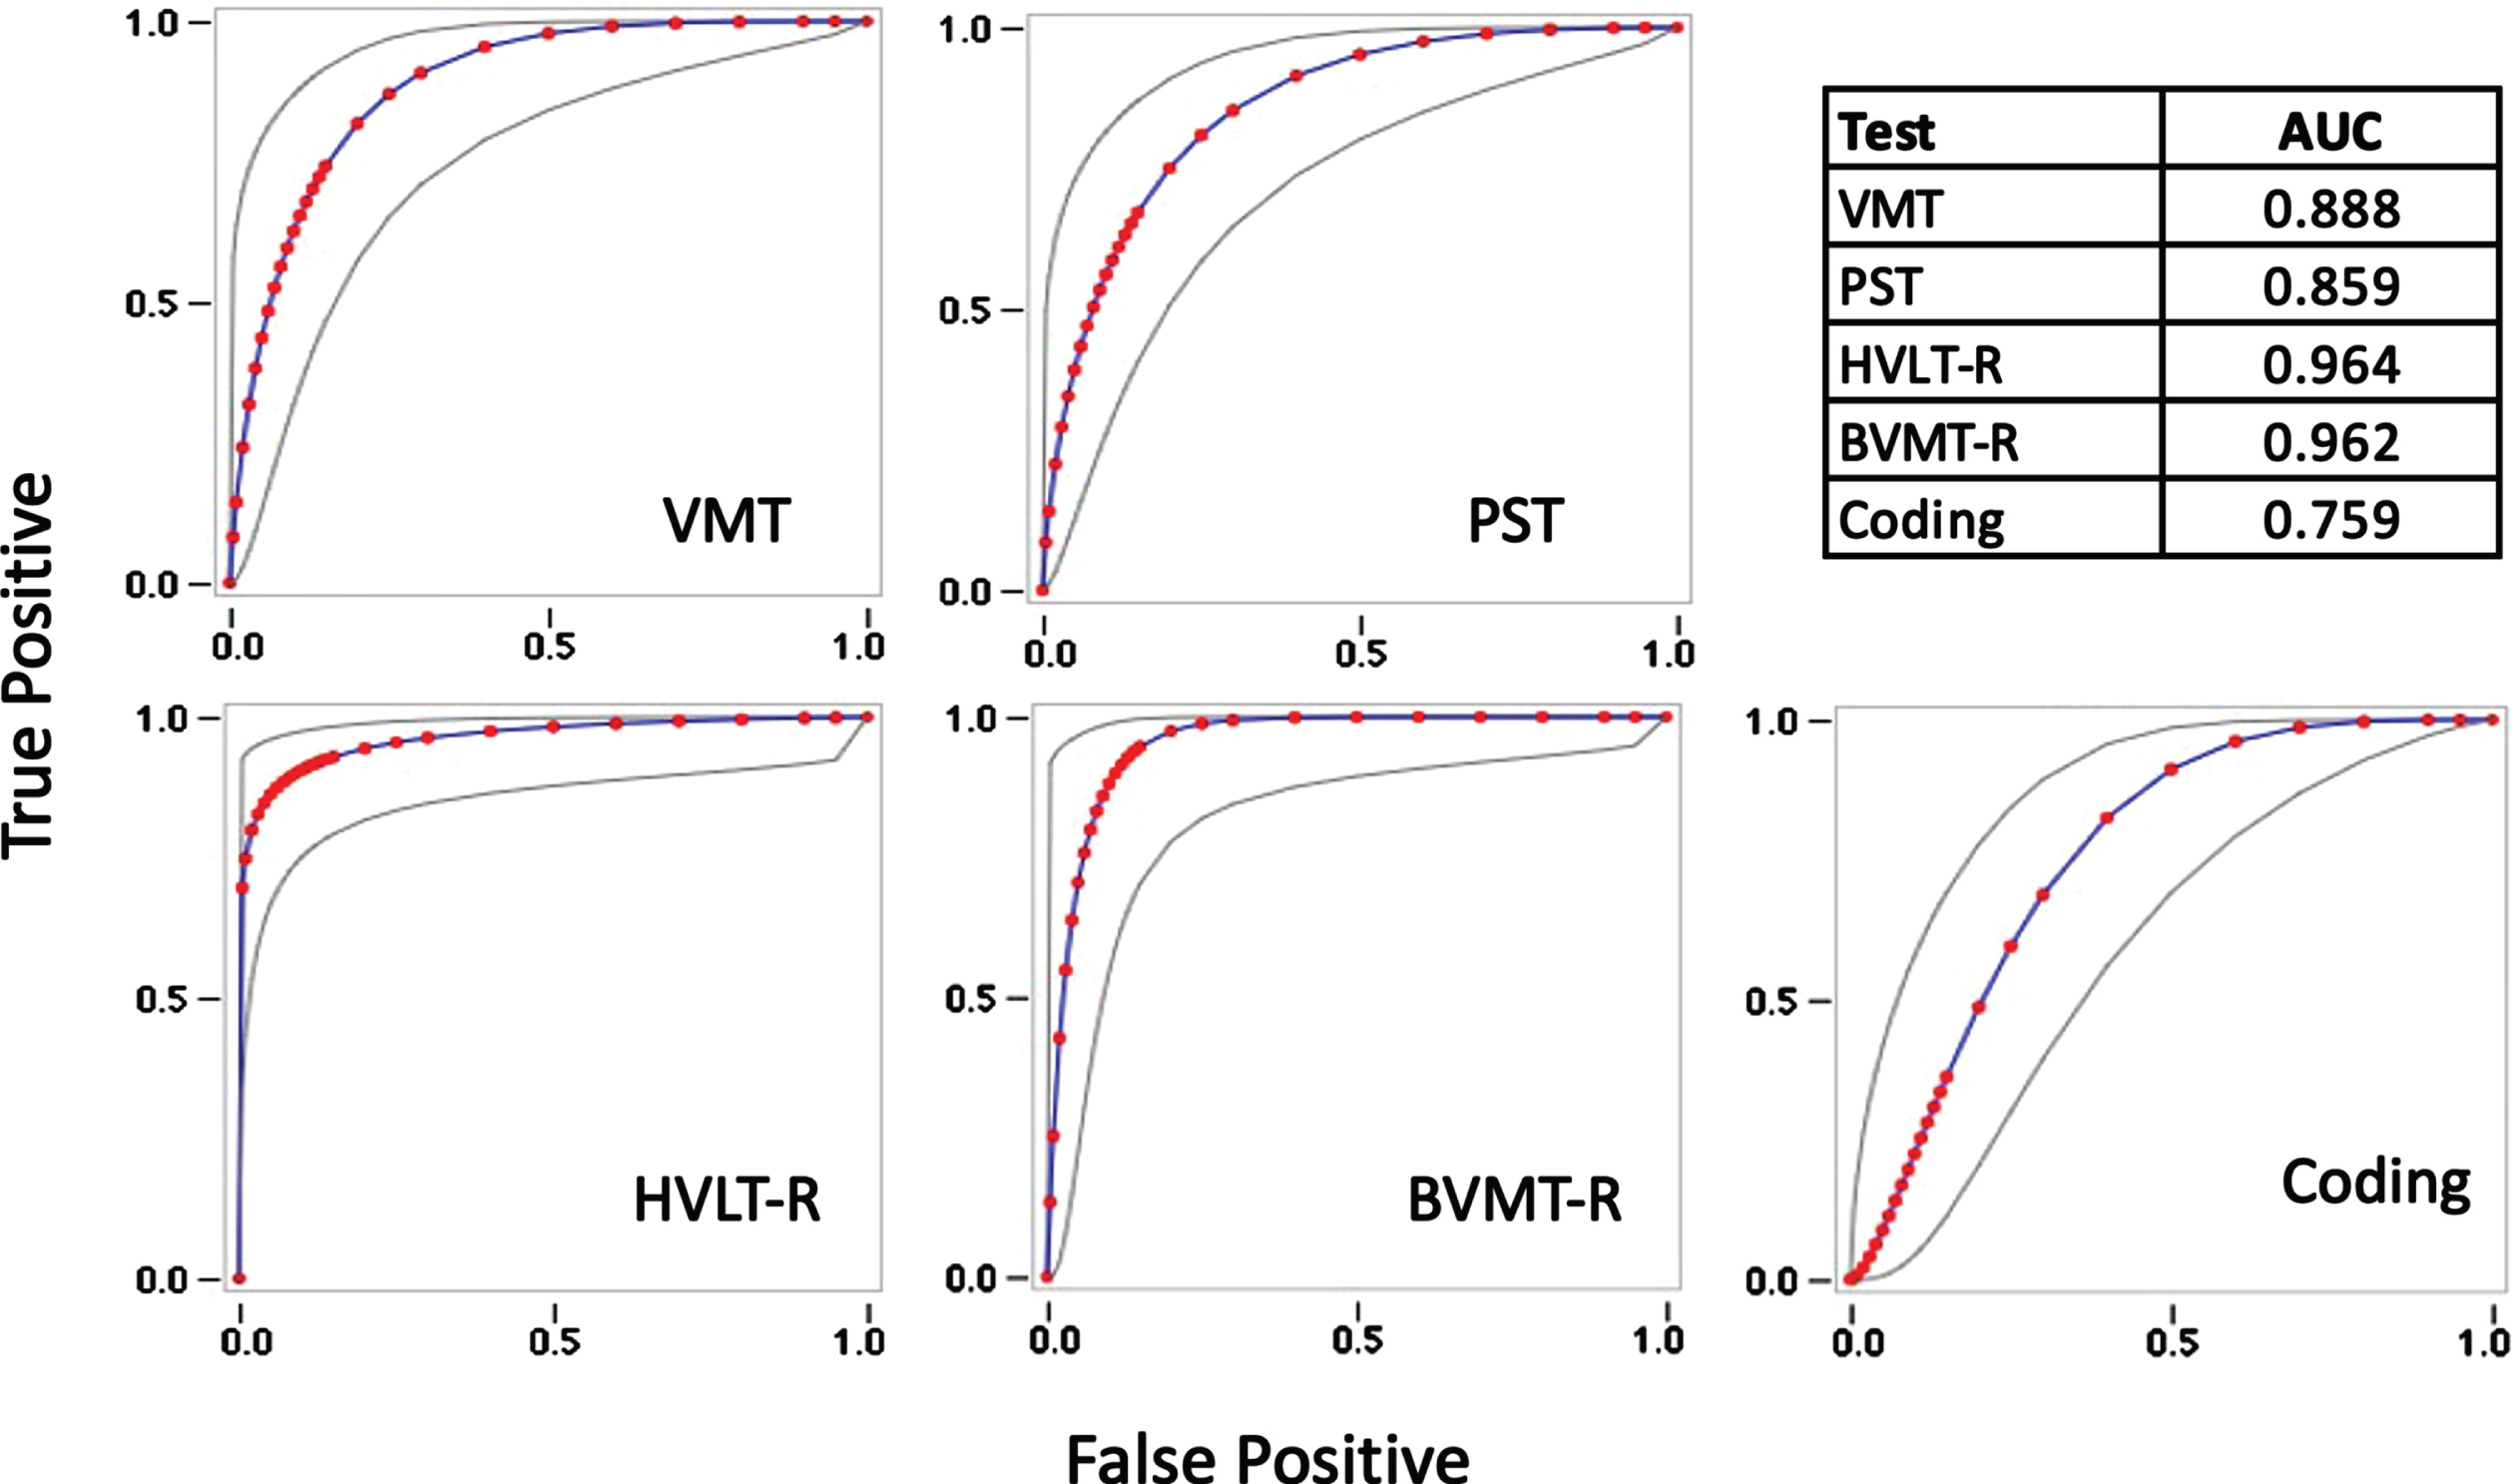 Receiver Operating Characteristic curves with Areas Under the Curve (AUC) estimates for the Visual Memory Test (VMT), Processing Speed Test (PST), Hopkins Verbal Learning Test-Revised (HVLT-R), Brief Visual Memory Test-Revised (BVMT-R), and WAIS-IV Coding subtest (Coding).